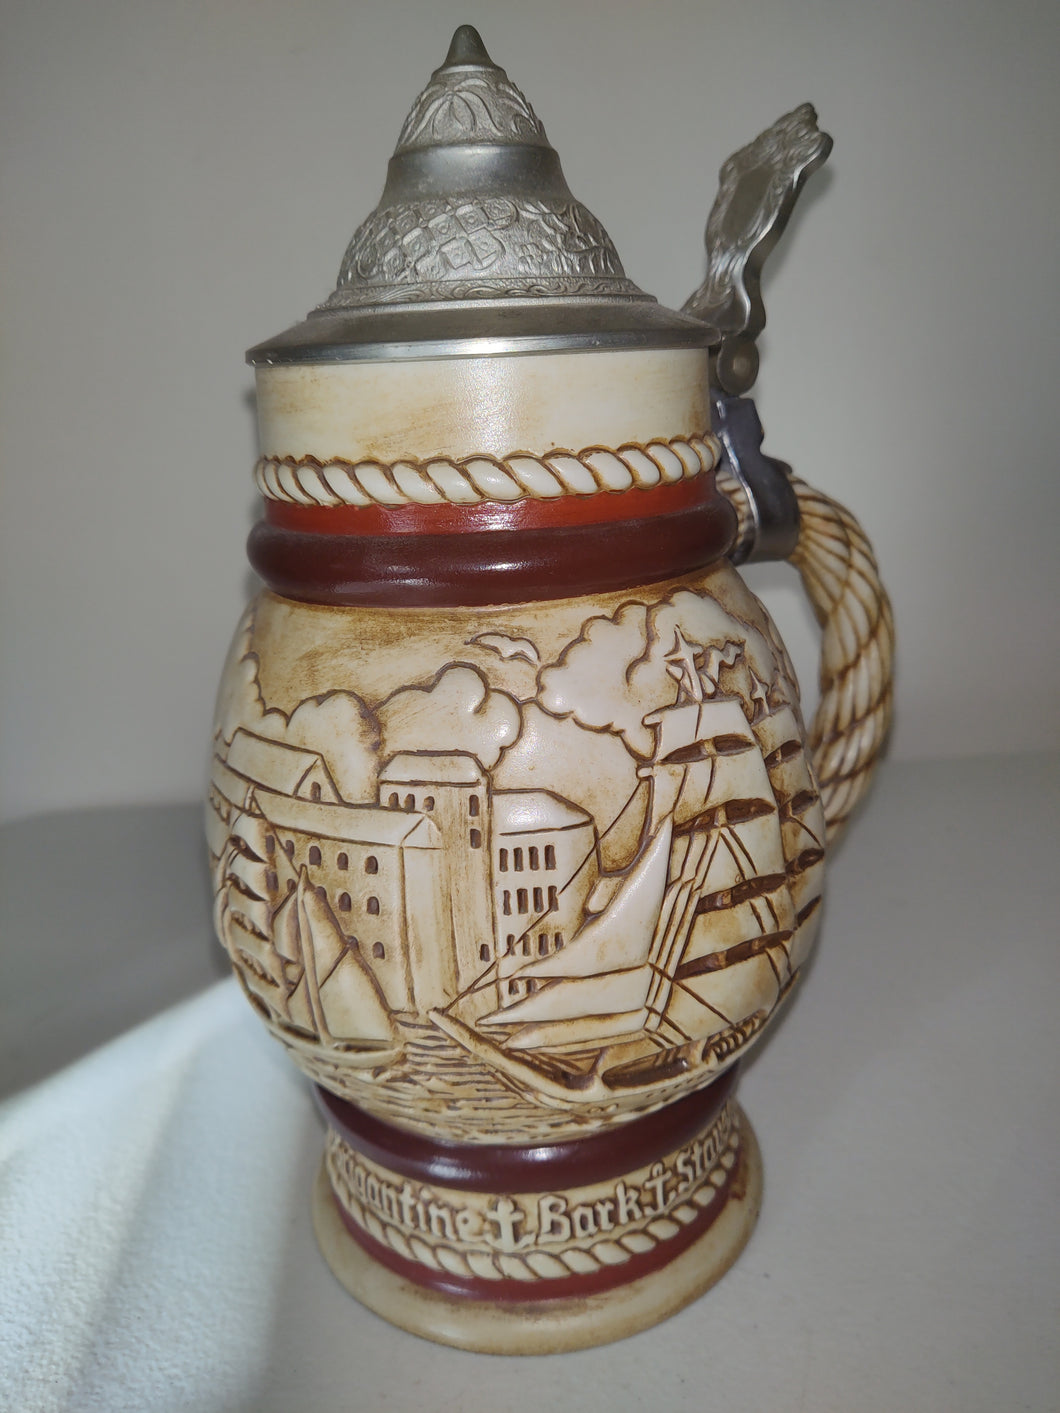 Vintage 1977 Avon Beer Stein Mug, Tall Ships Handcrafted In Brazil -Nautical.